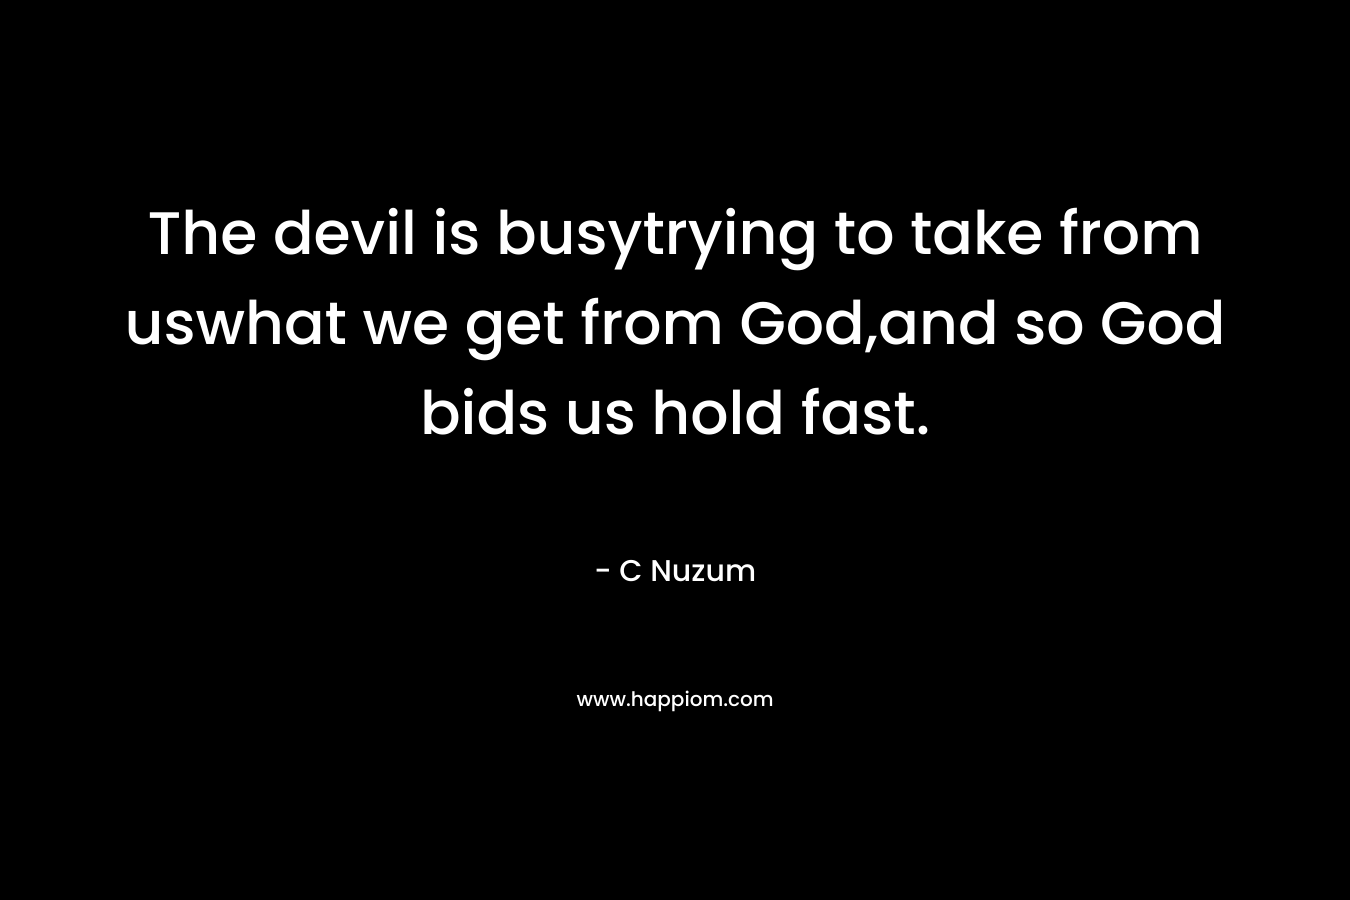 The devil is busytrying to take from uswhat we get from God,and so God bids us hold fast. – C Nuzum